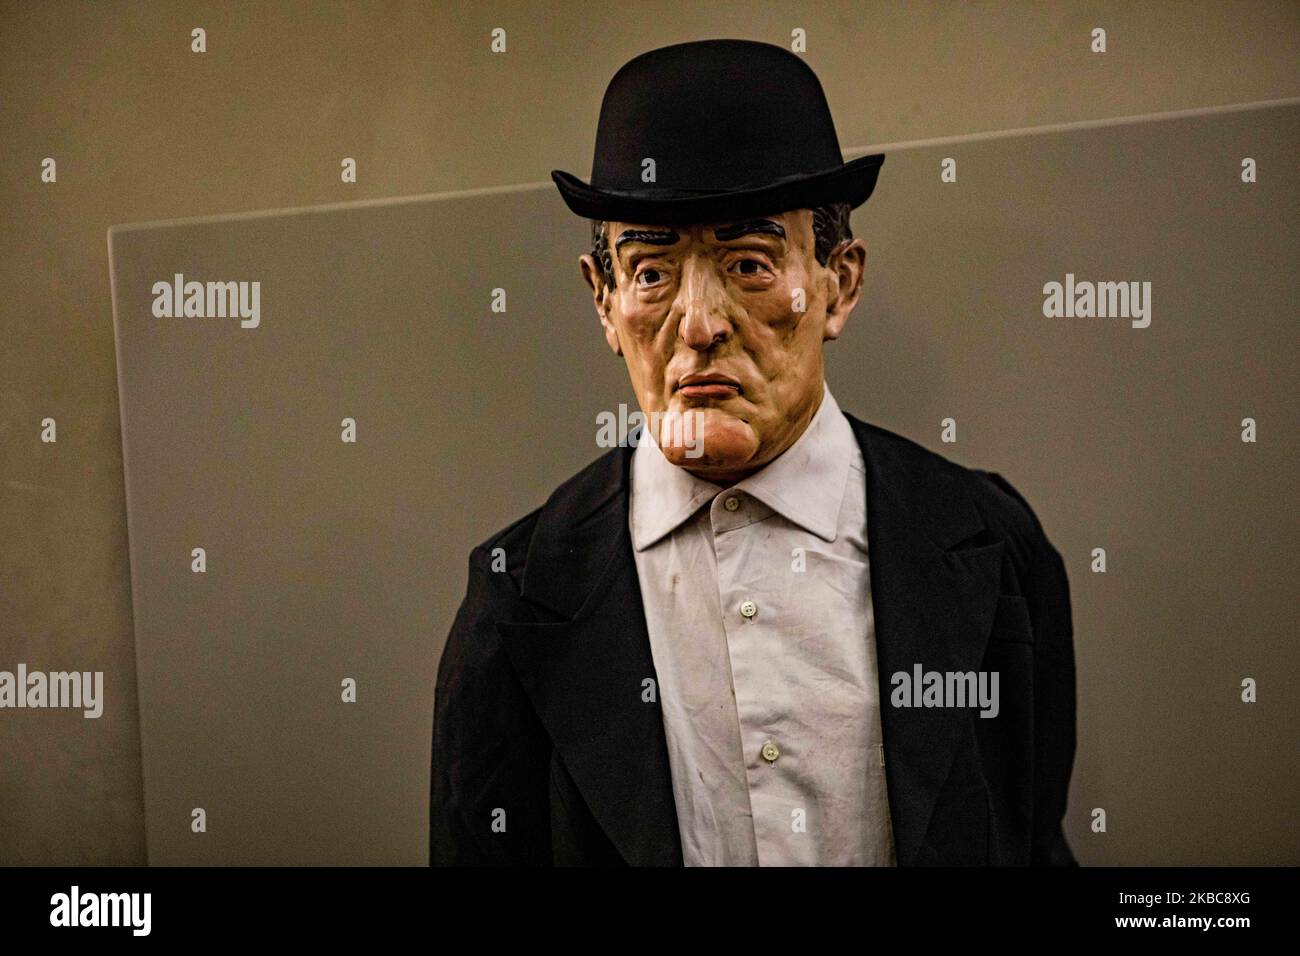 A statue of the Italian actor Toto, pseudonym of Antonio de Curtis, is exhibited outside the Rinascente in Piazza del Duomo in Milan., Italy, on December 06 2019. (Photo by Mairo Cinquetti/NurPhoto) Stock Photo